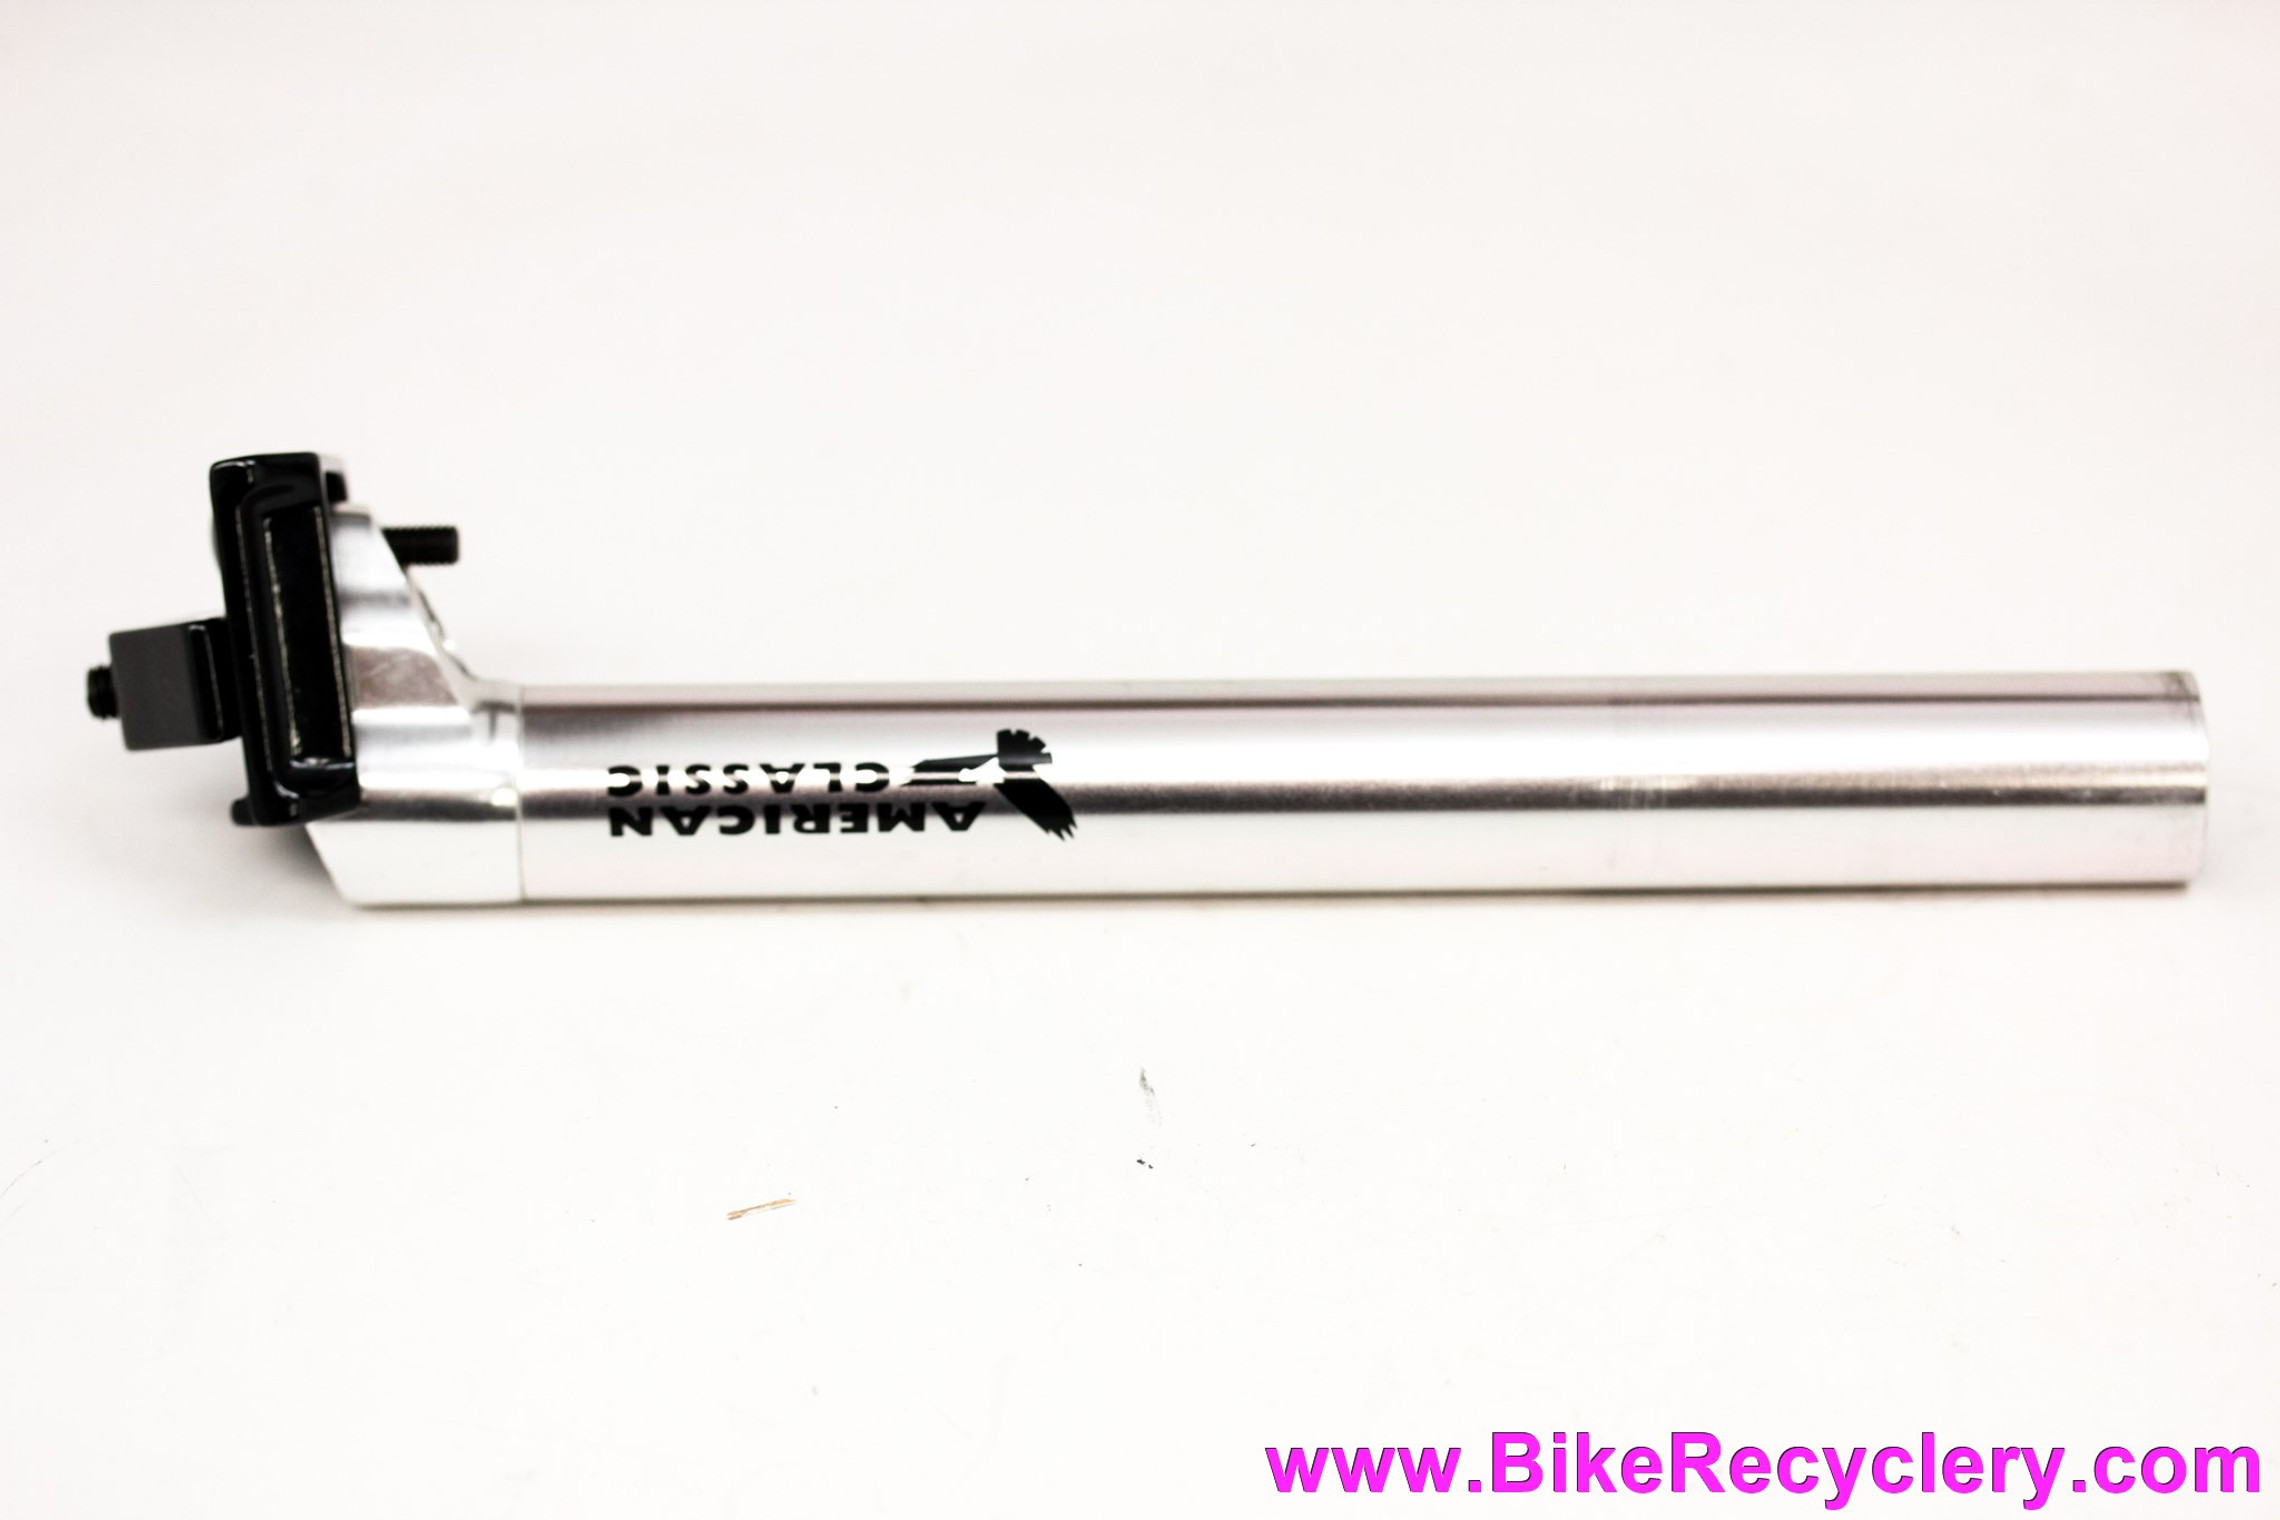 NOS American Classic Seatpost: 27.2mm - Silver (take-off)